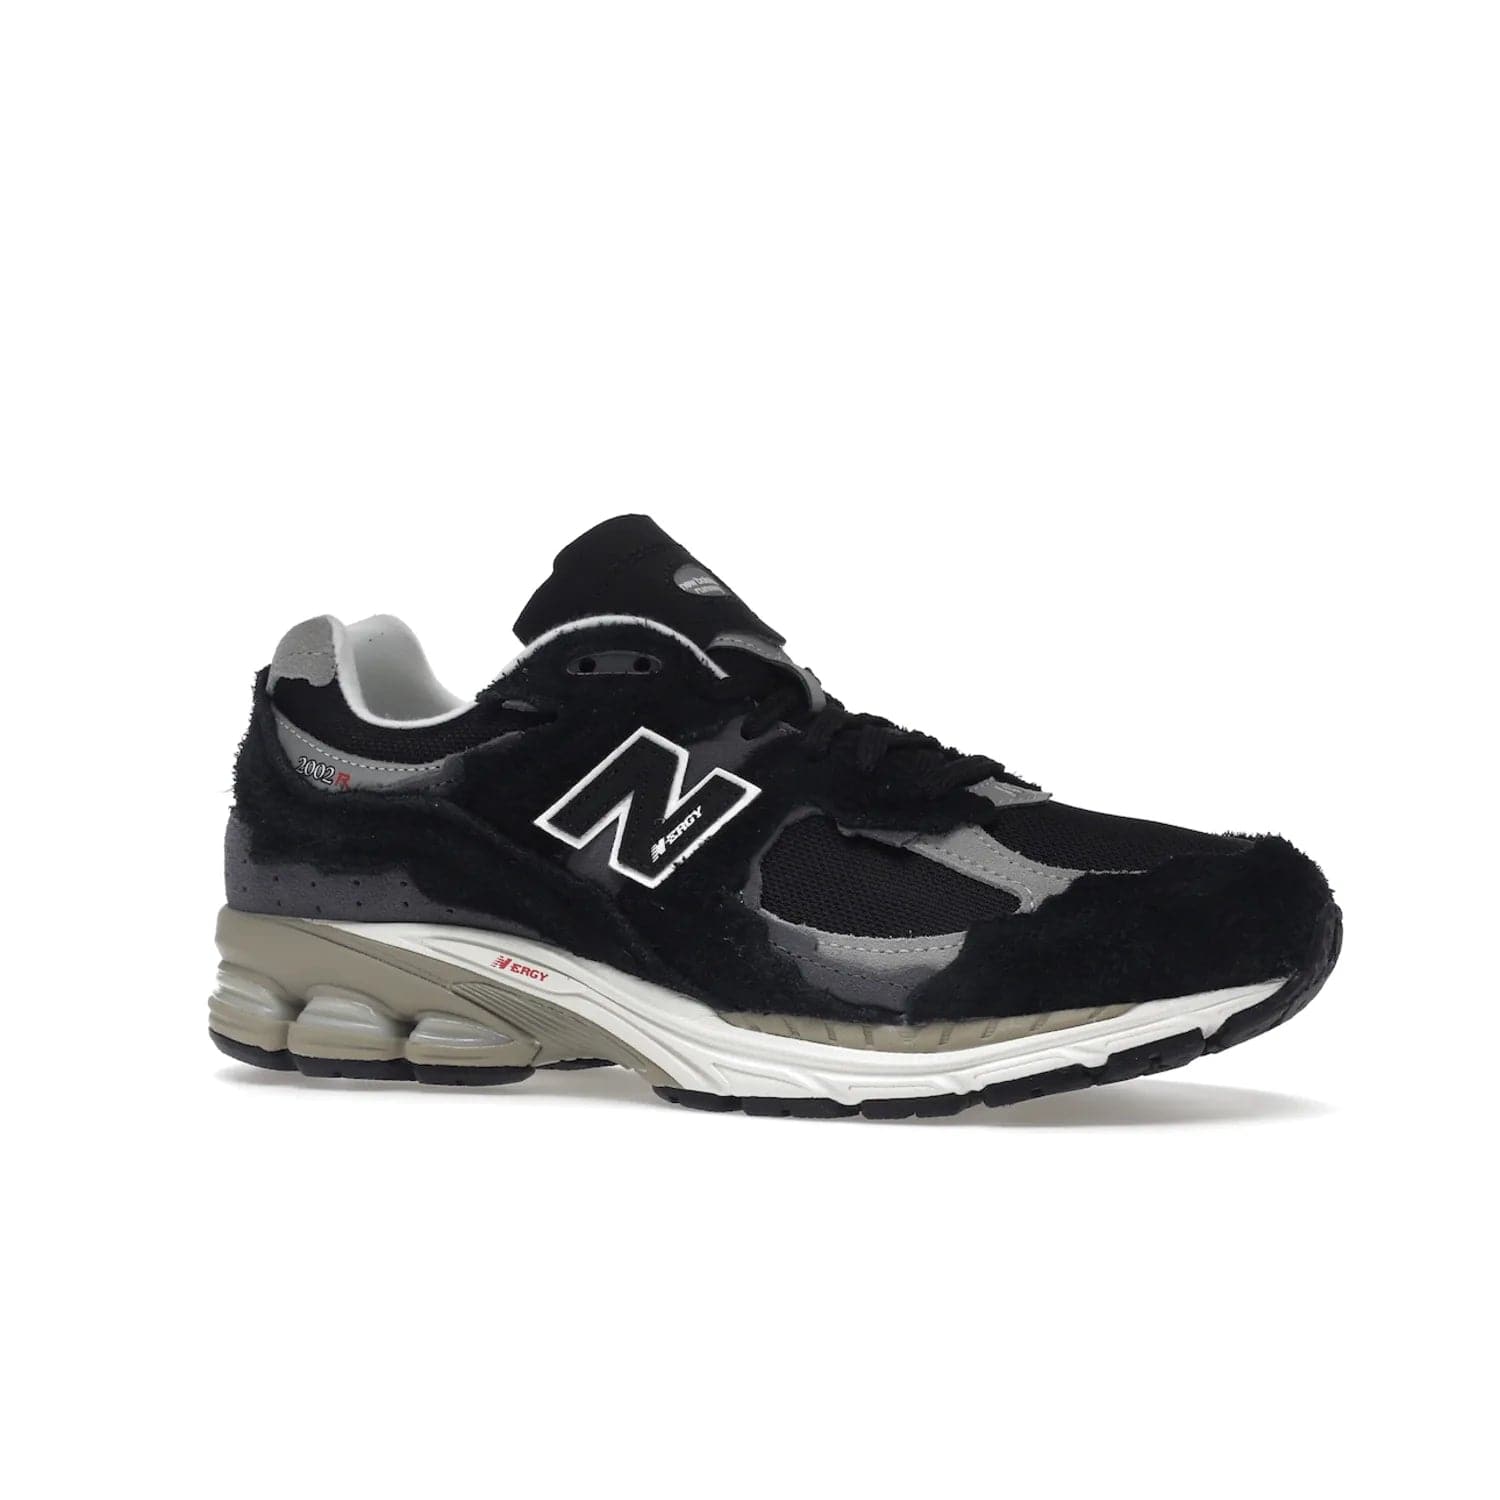 New Balance 2002R Protection Pack Black Grey - Image 3 - Only at www.BallersClubKickz.com - Look stylish in the New Balance 2002R Protection Pack Black Grey. Uppers constructed from premium materials like mesh and synthetic overlays. Iconic "N" emblem appears in white and black. ABZORB midsole for shock absorption and responsiveness. Black outsole for grip and traction. Lacing system offers customized fit and cushioned tongue and collar offer comfort and stability. Step up your style with this must-have